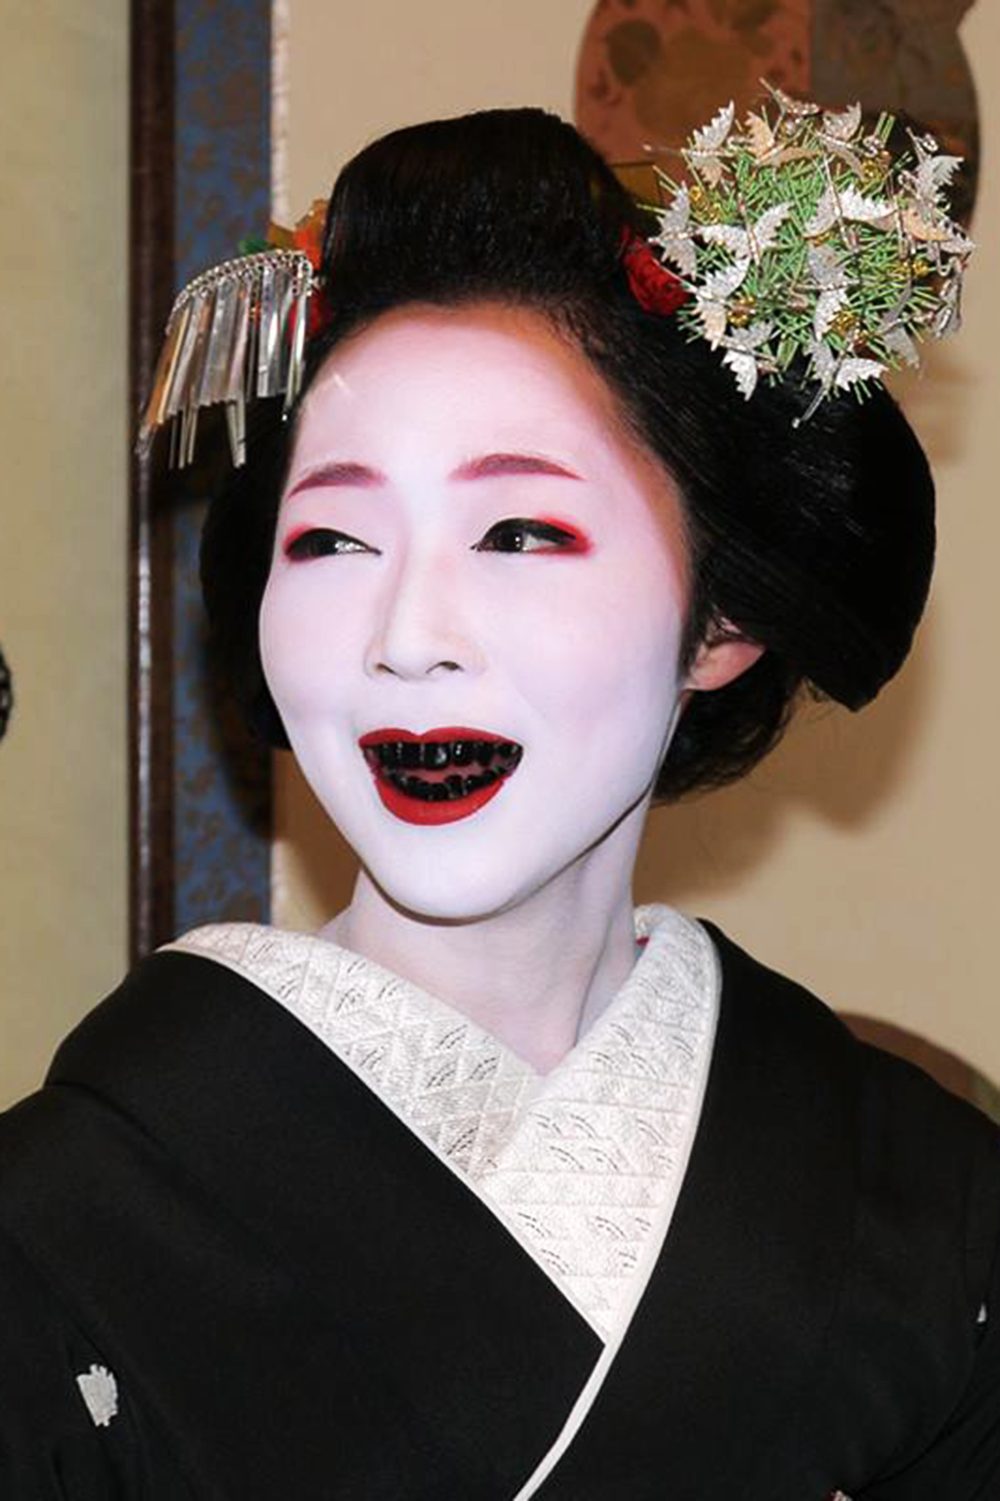 The woman in the image is wearing a black and white kimono with white lace and a white flower on her head. She has long black hair and black eyes. She has black teeth and white facial makeup.